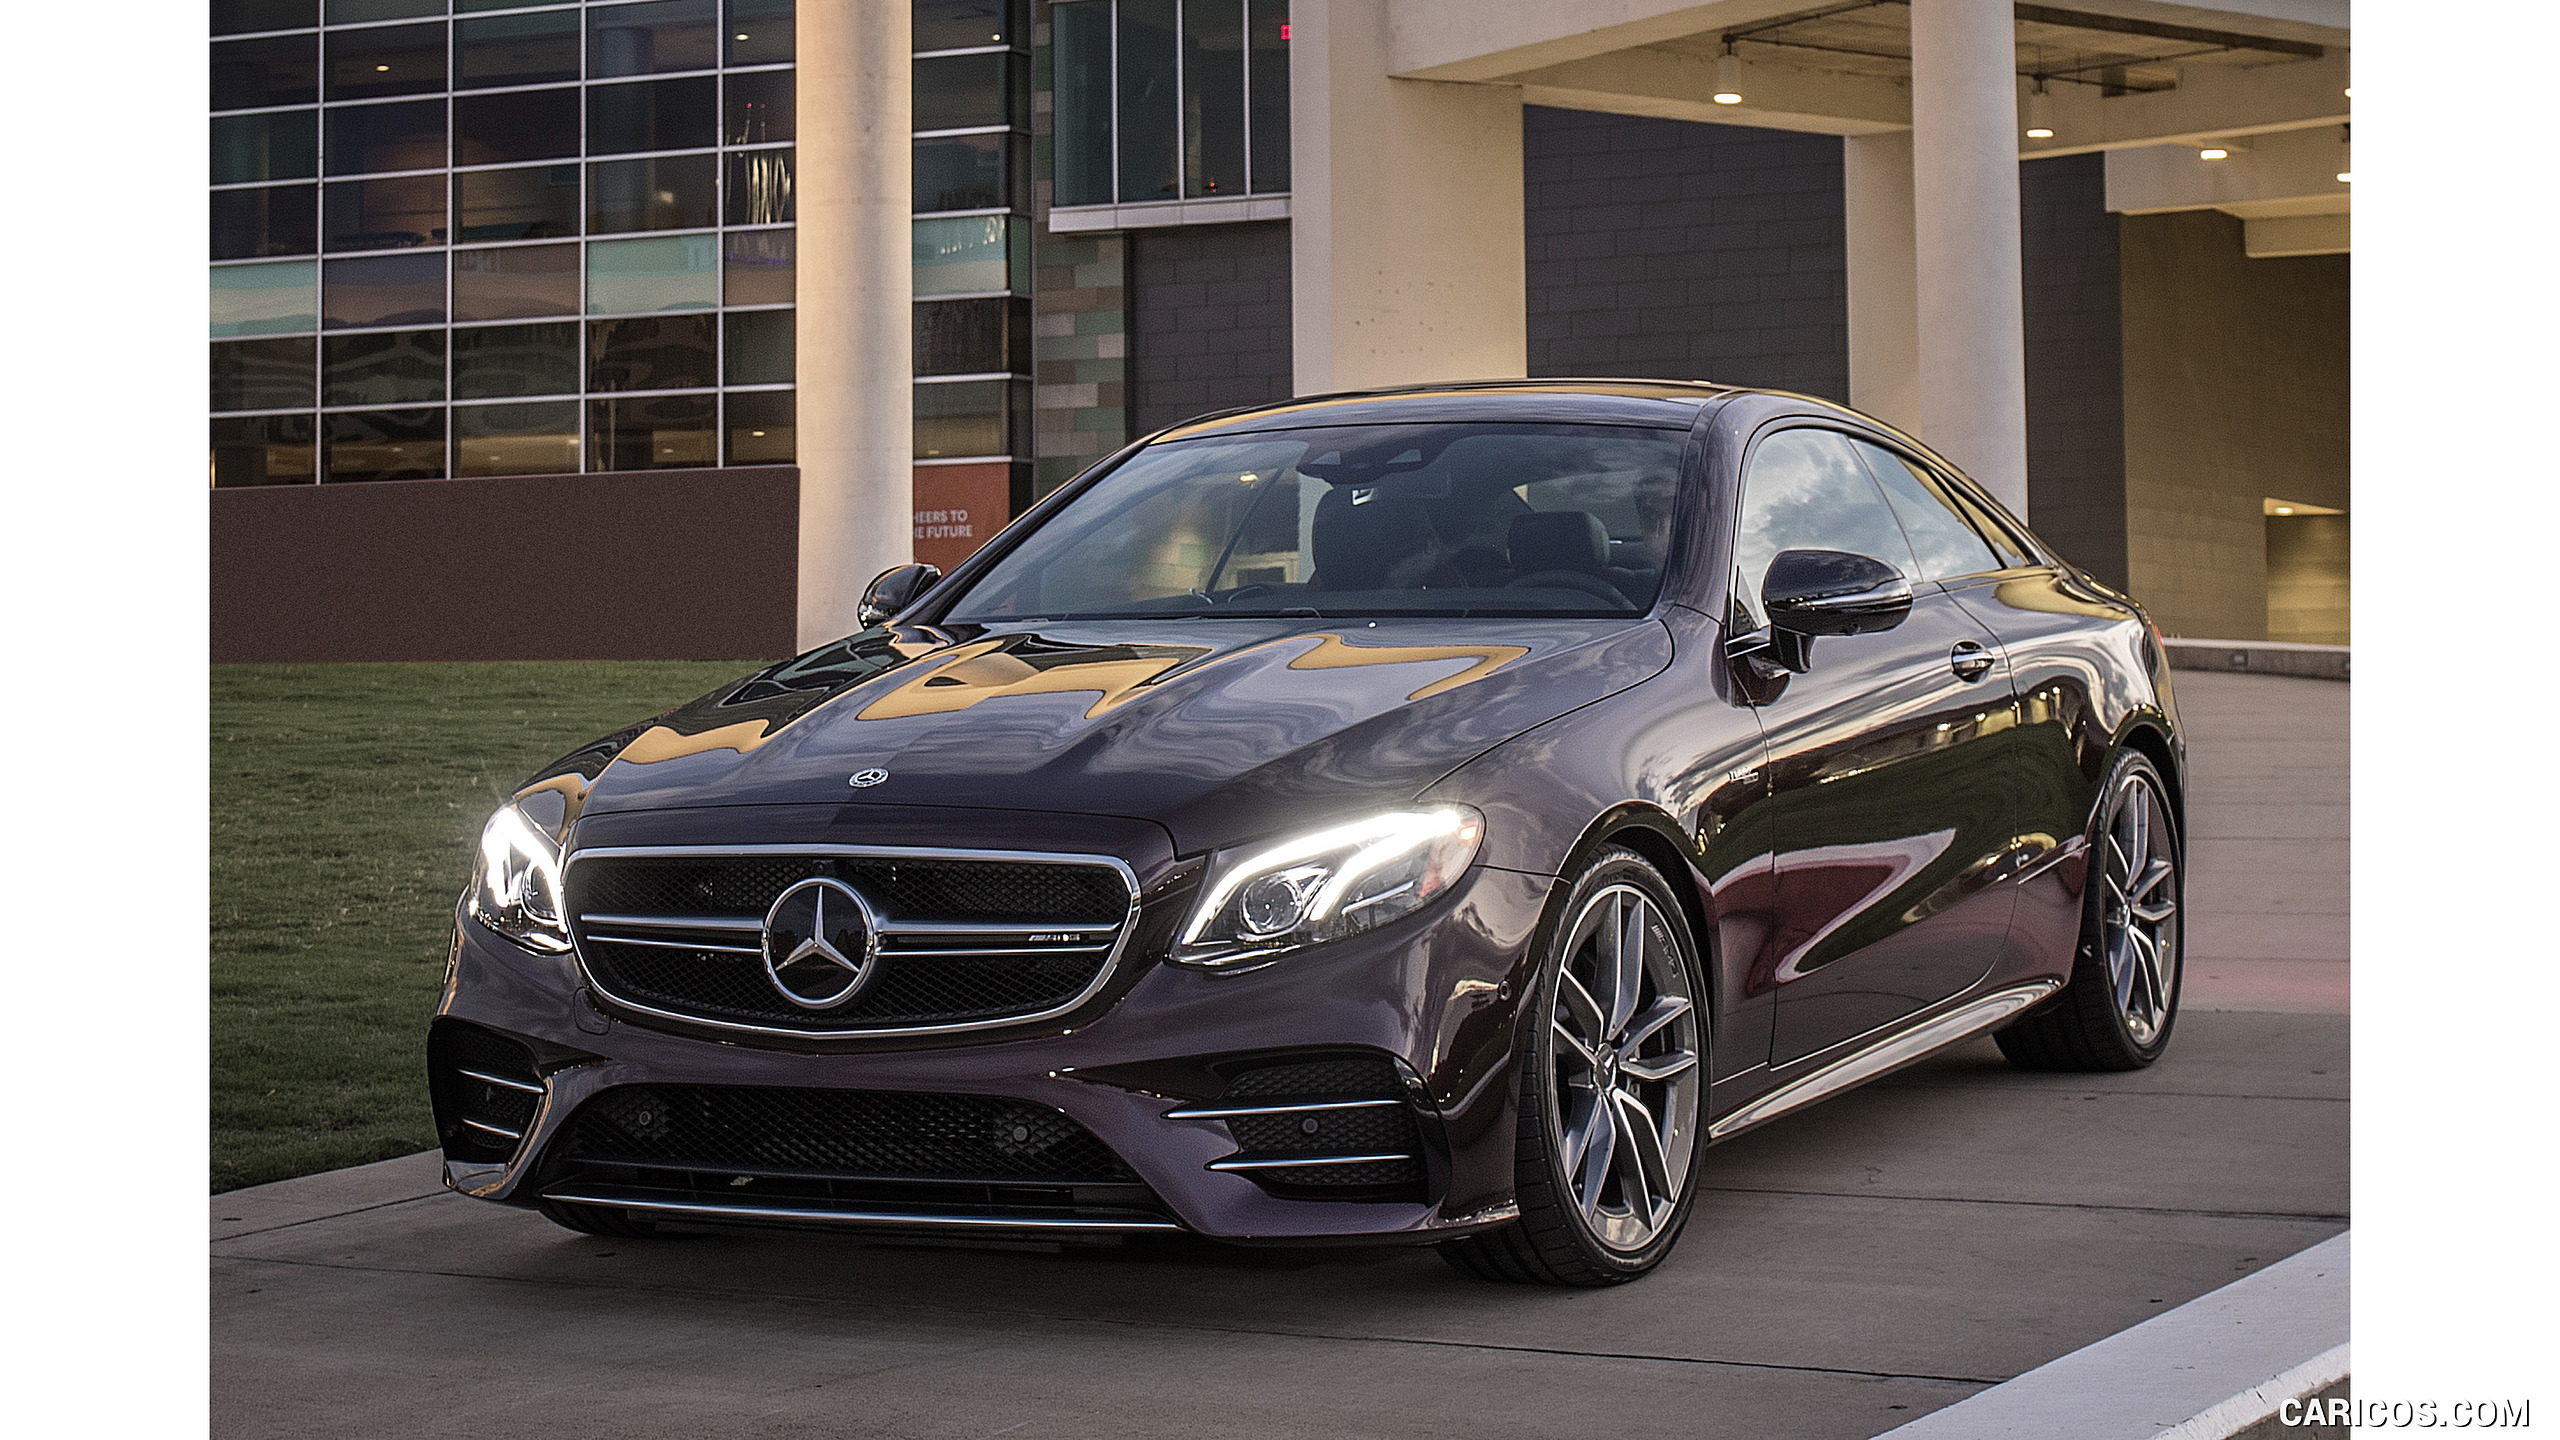 2019 Mercedes-AMG E 53 4MATIC+ Coupe (US-Spec) Wallpaper - Front, #156 of 193